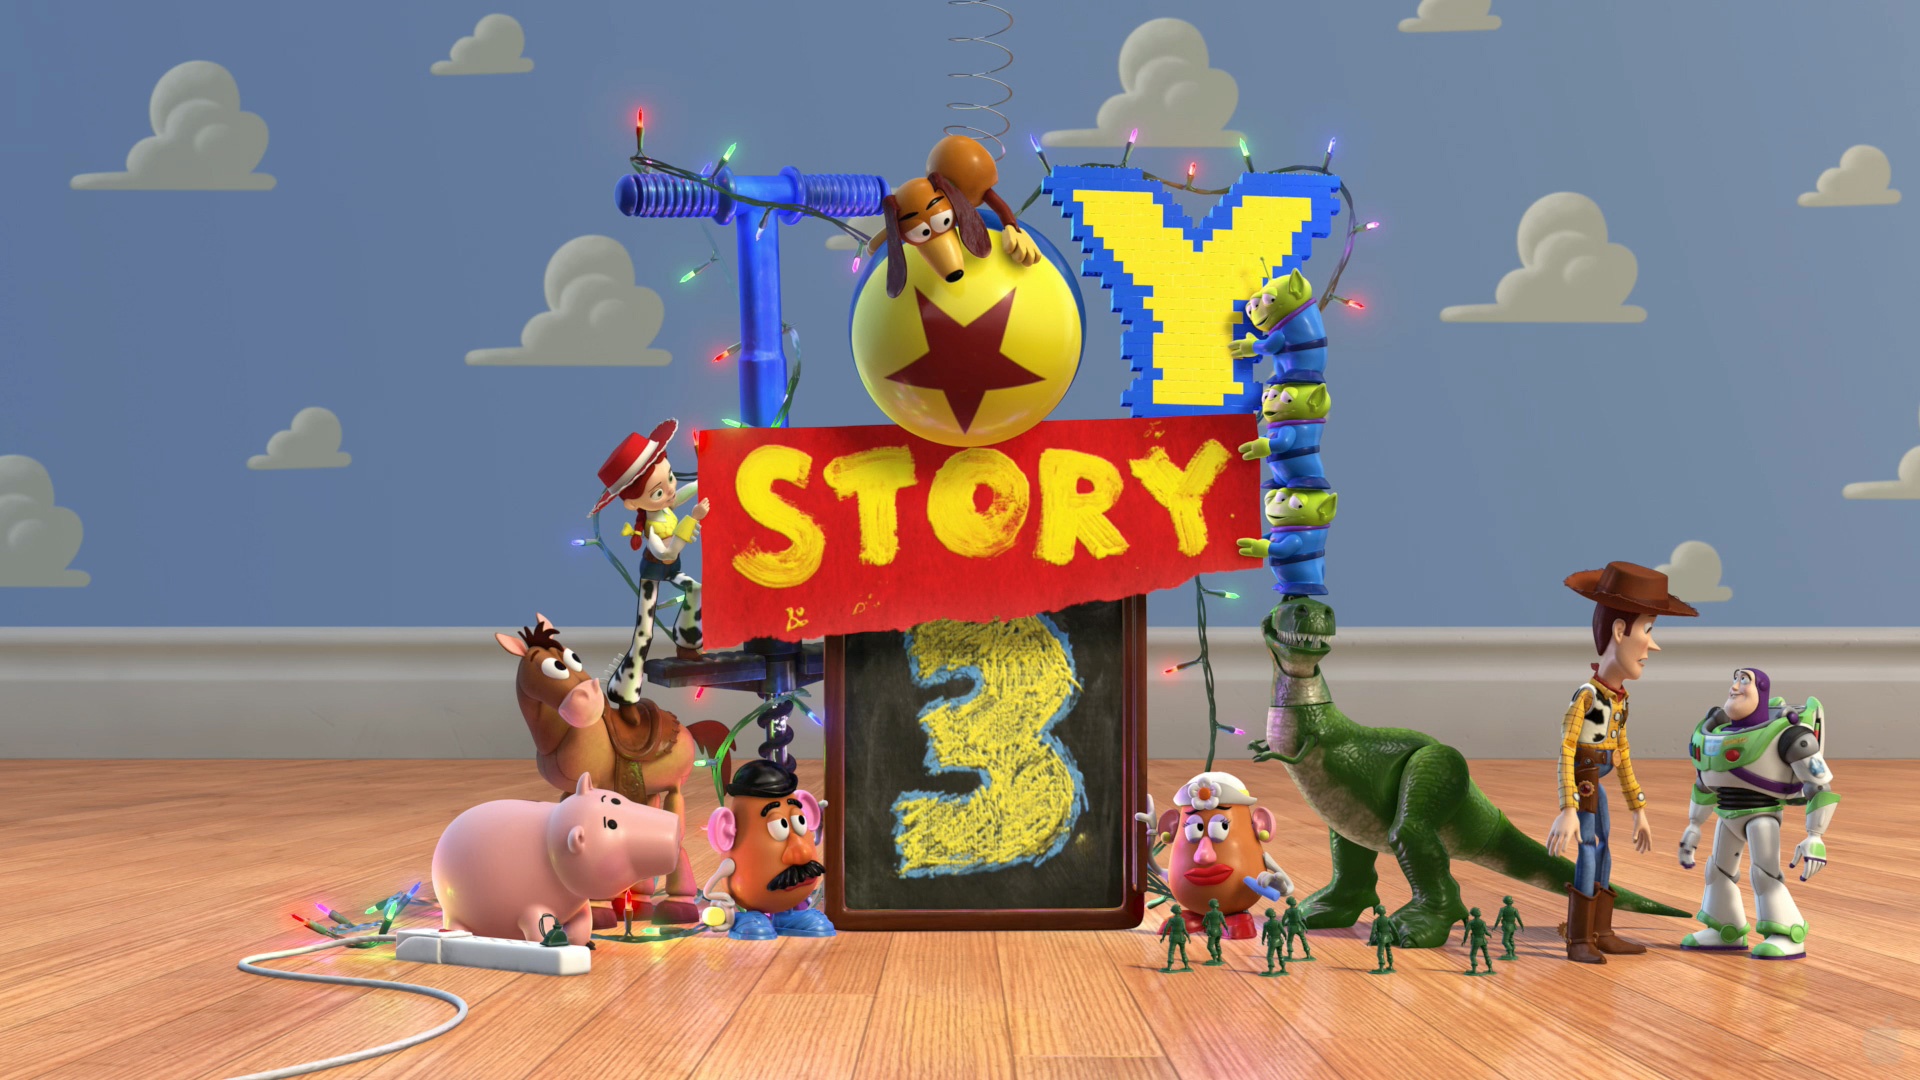 Toy Story 3 Wallpapers Toy Story 3 Myspace Backgrounds Toy Story 3 1920x1080